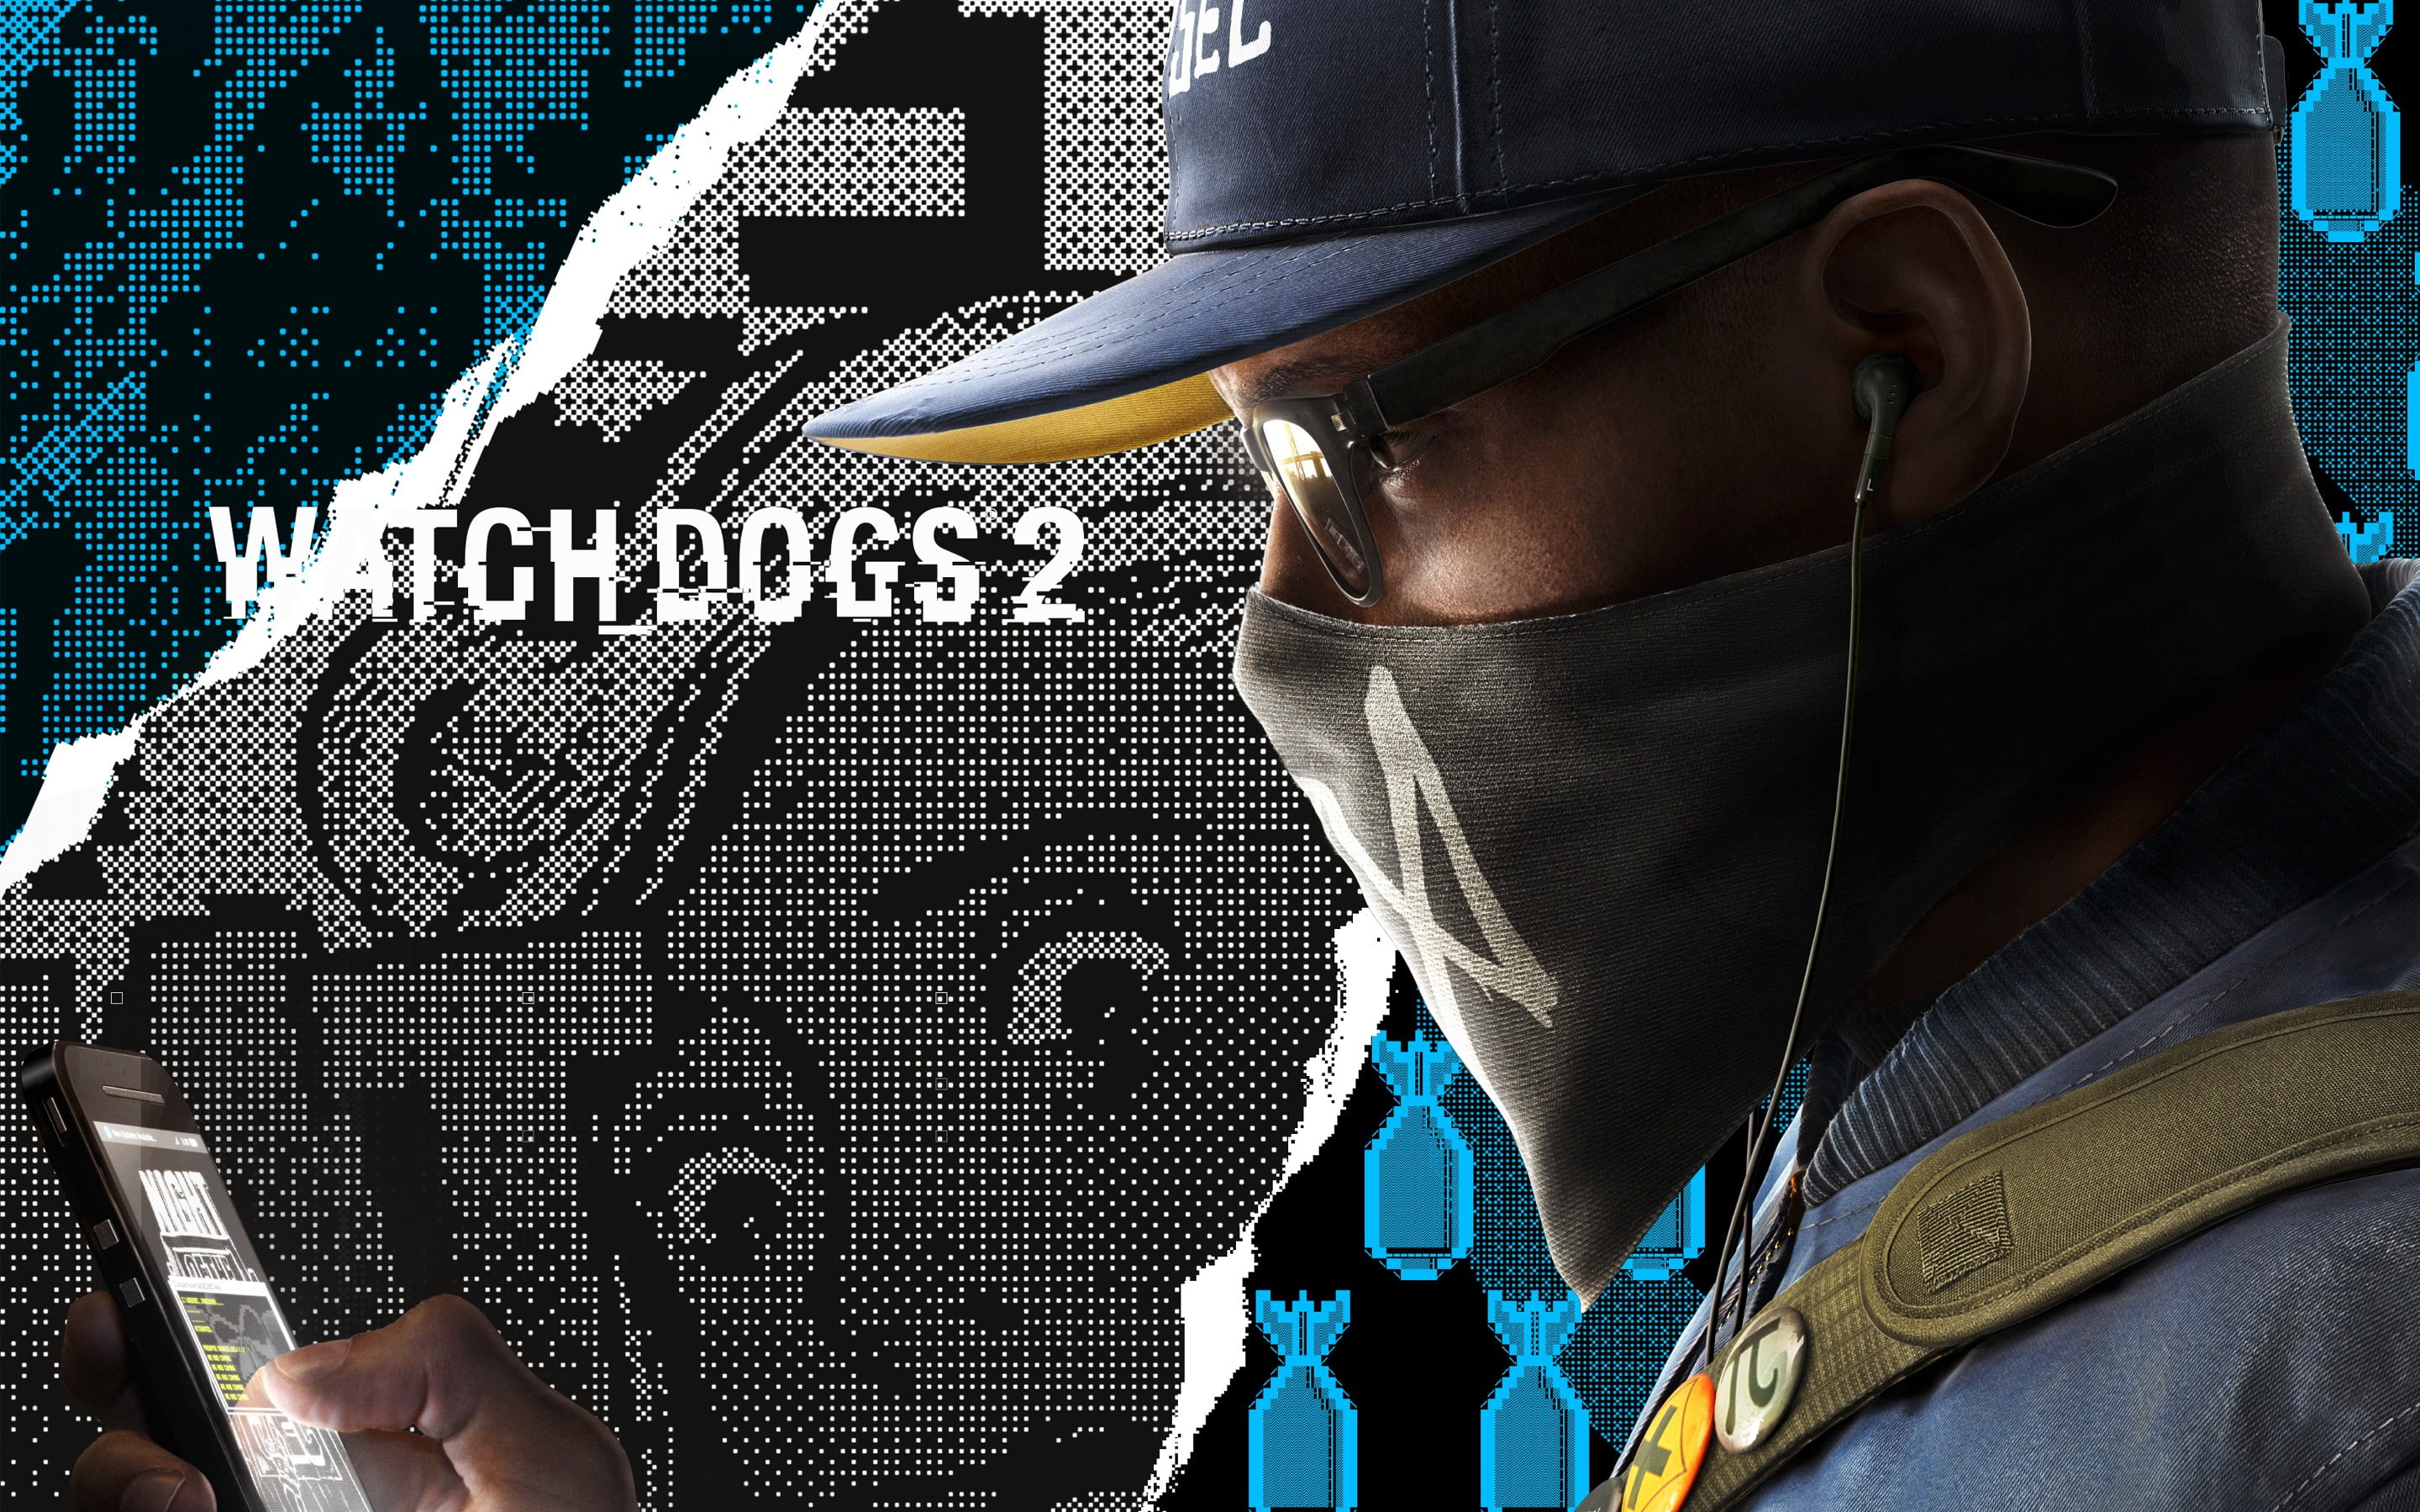 Watch_Dogs 2, Marcus Holloway, Ubisoft, video games, people